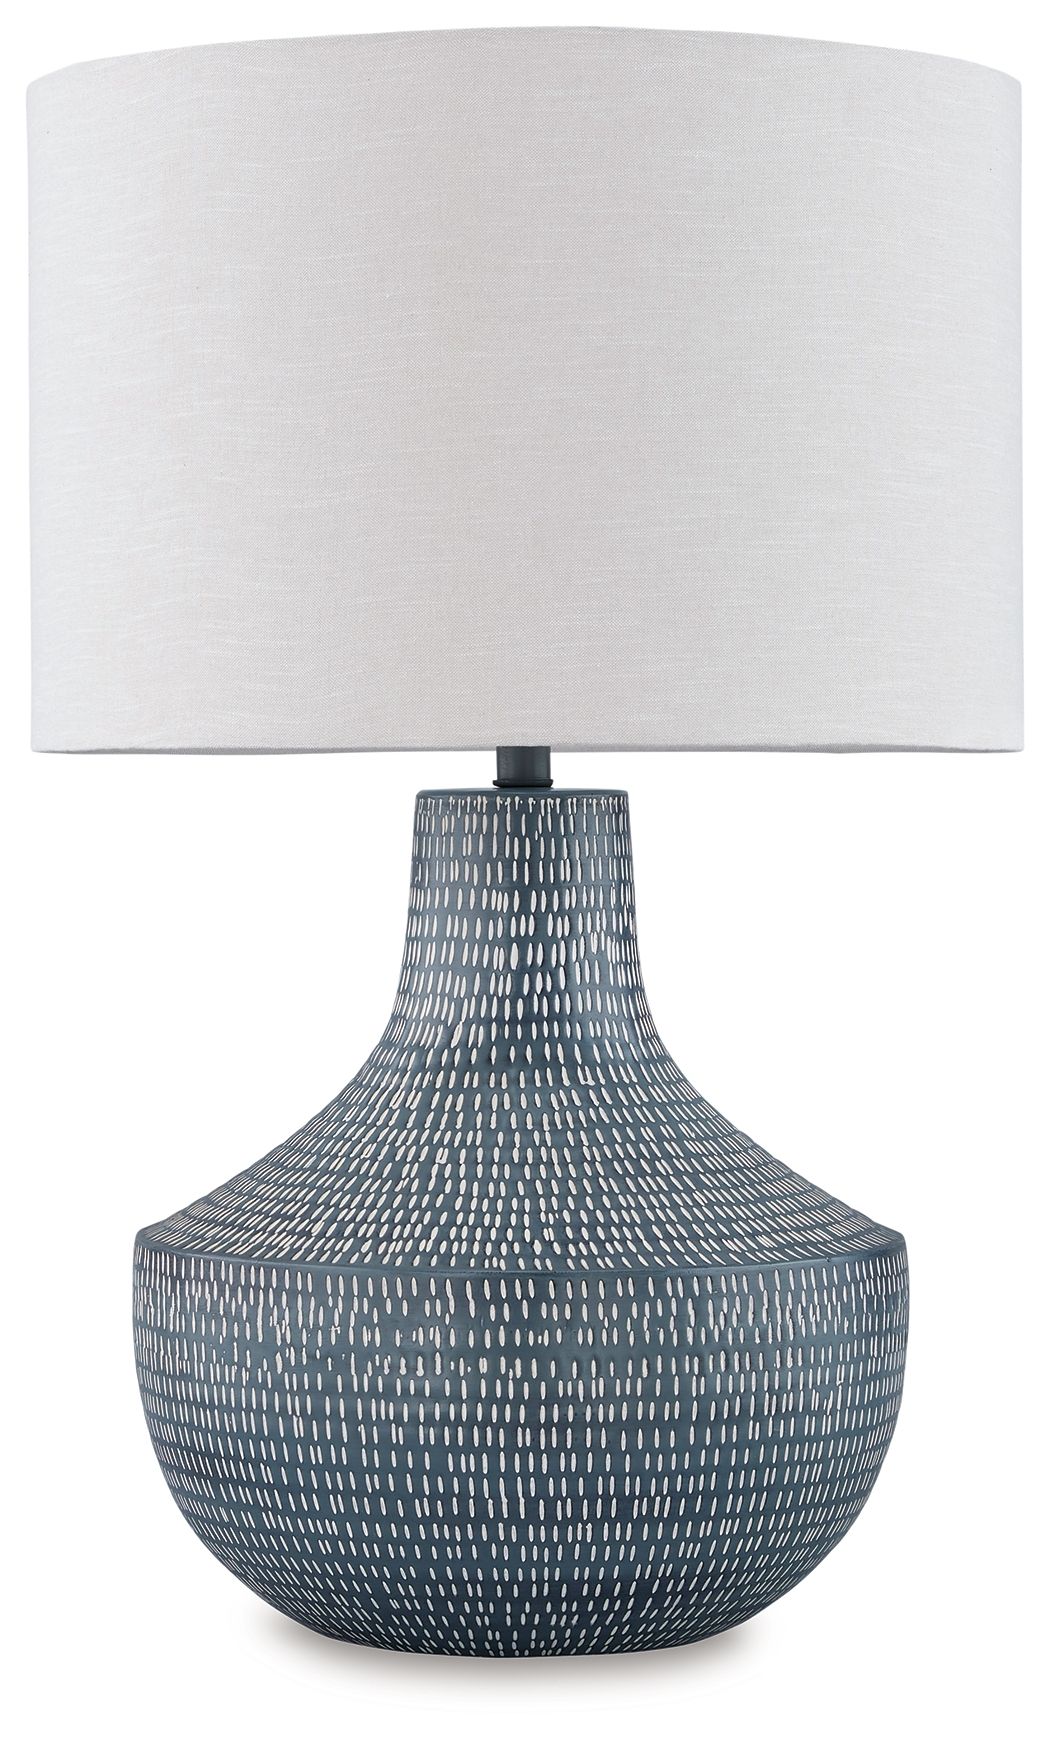 Schylarmont - Antique Gray / White - Metal Table Lamp - Tony's Home Furnishings